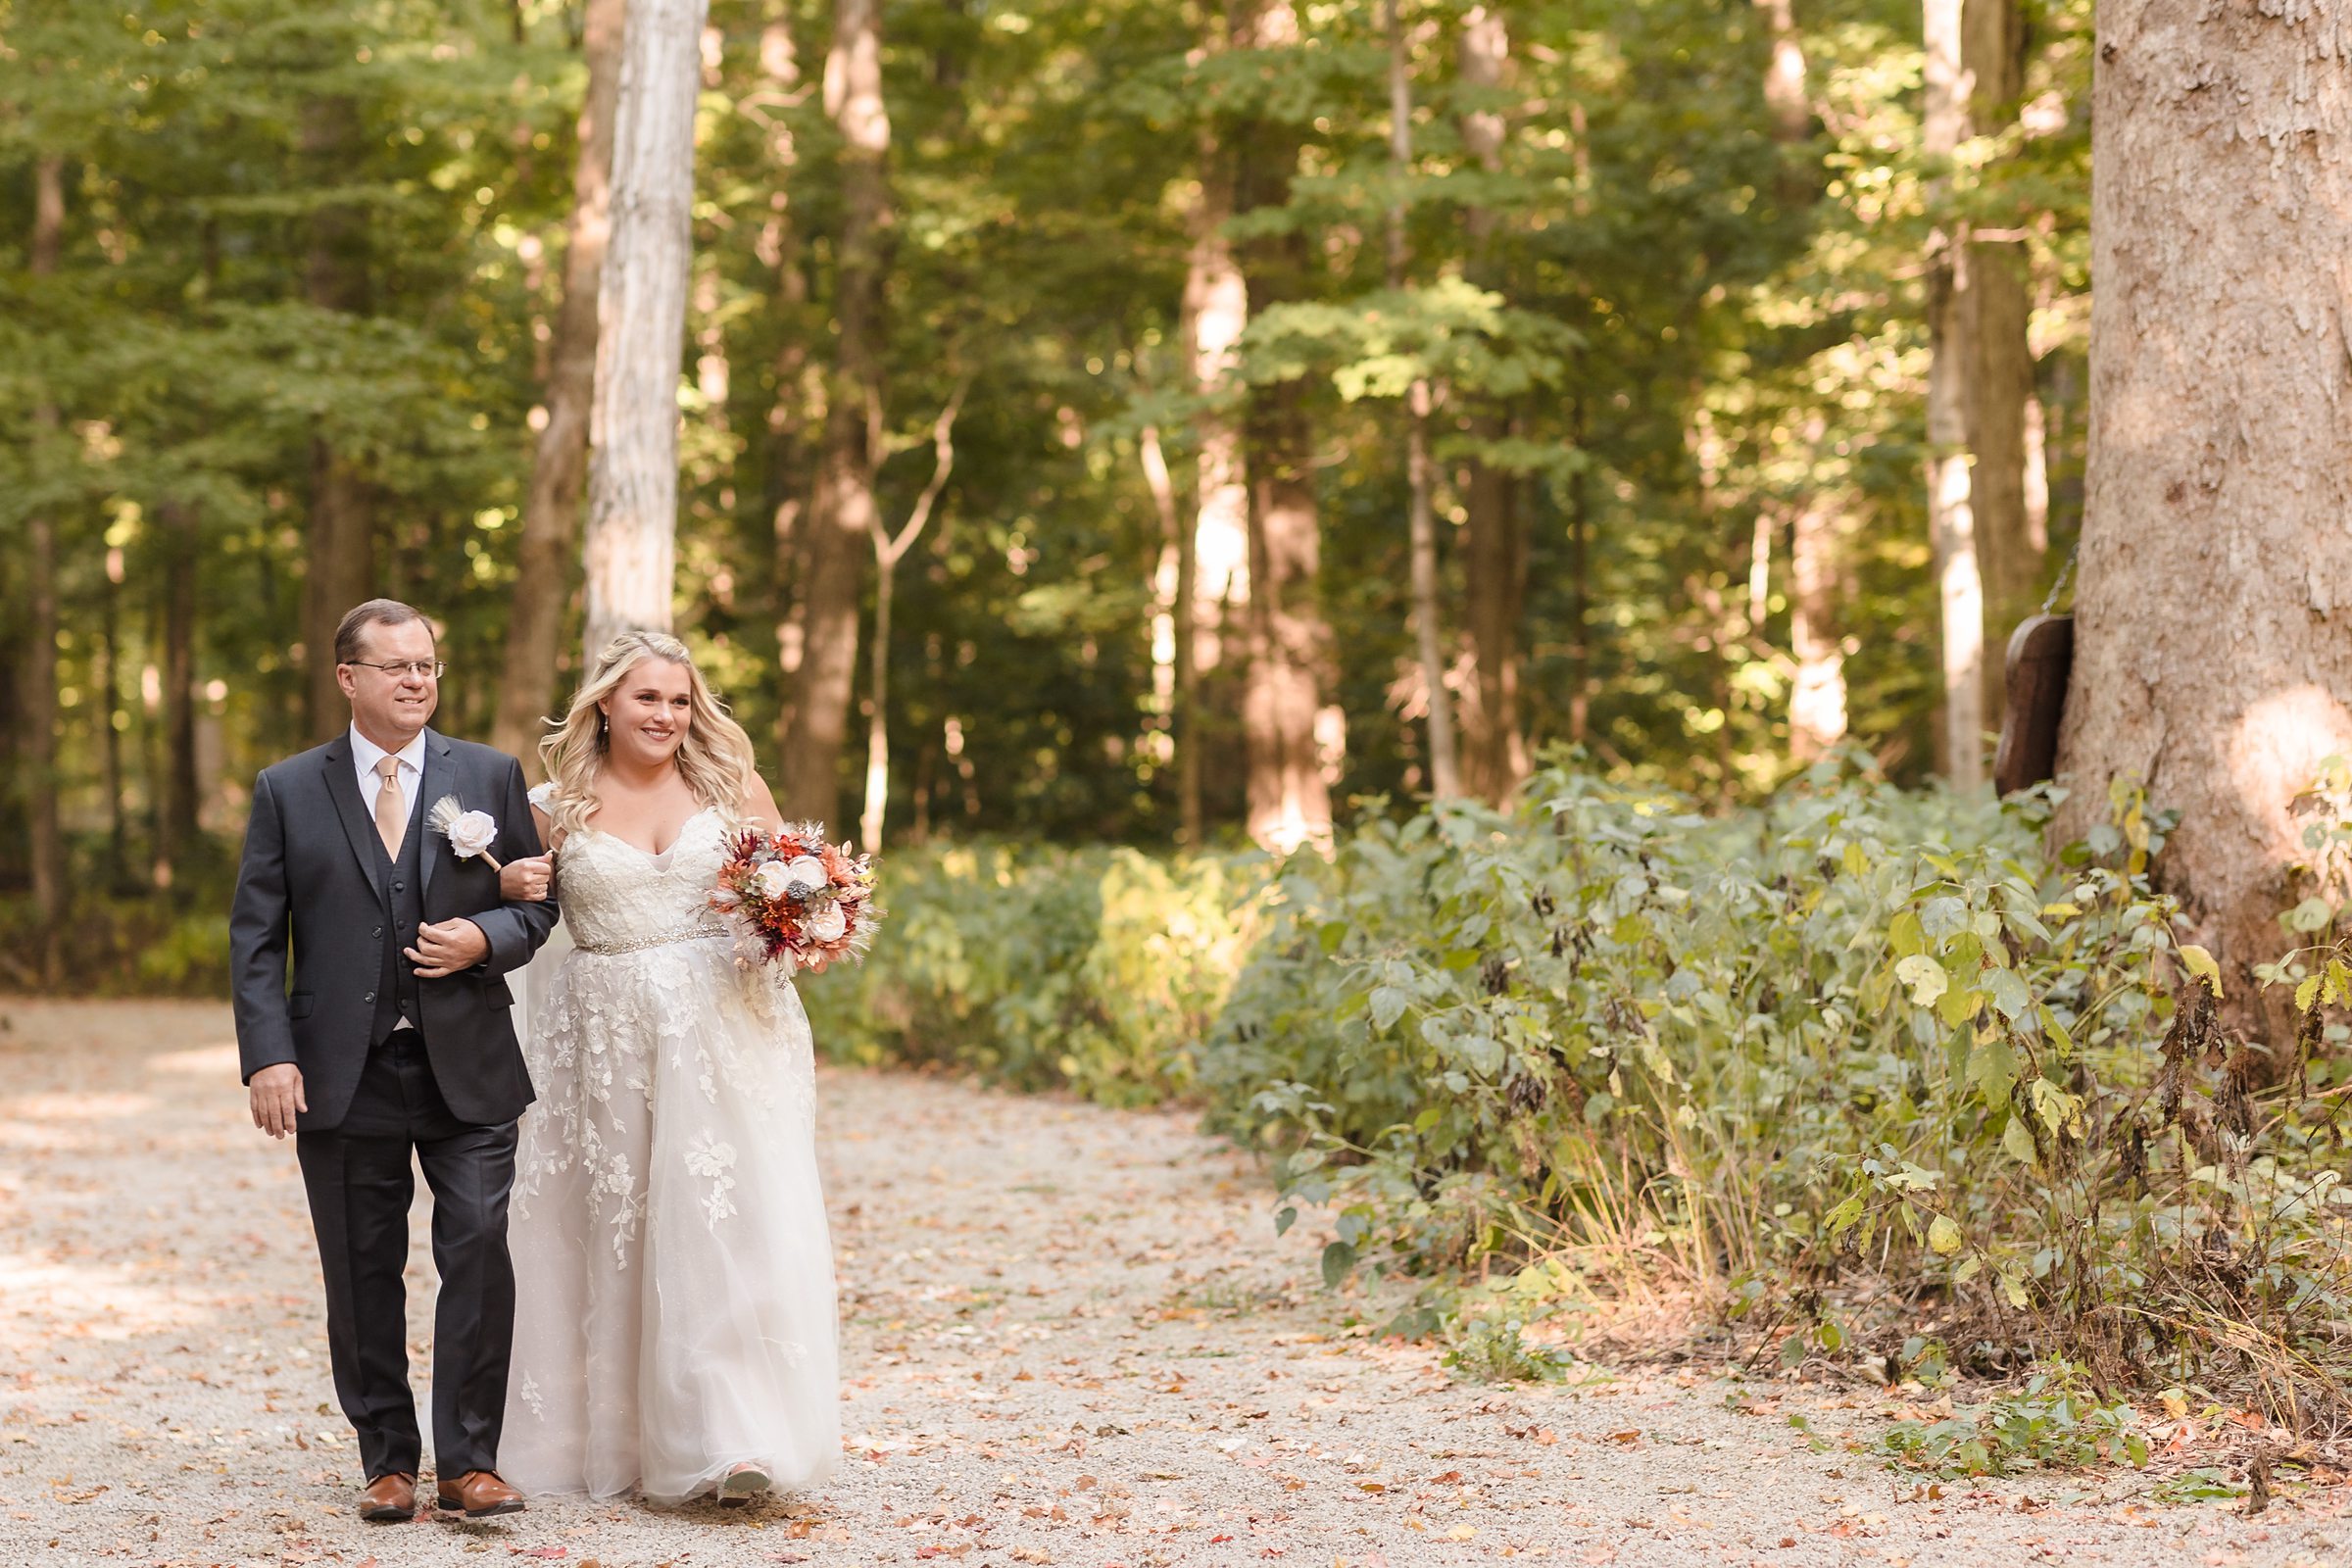 Bride and dad walk down the aisle during a wedding ceremony at Funks Grove in Mclean, Illinois.